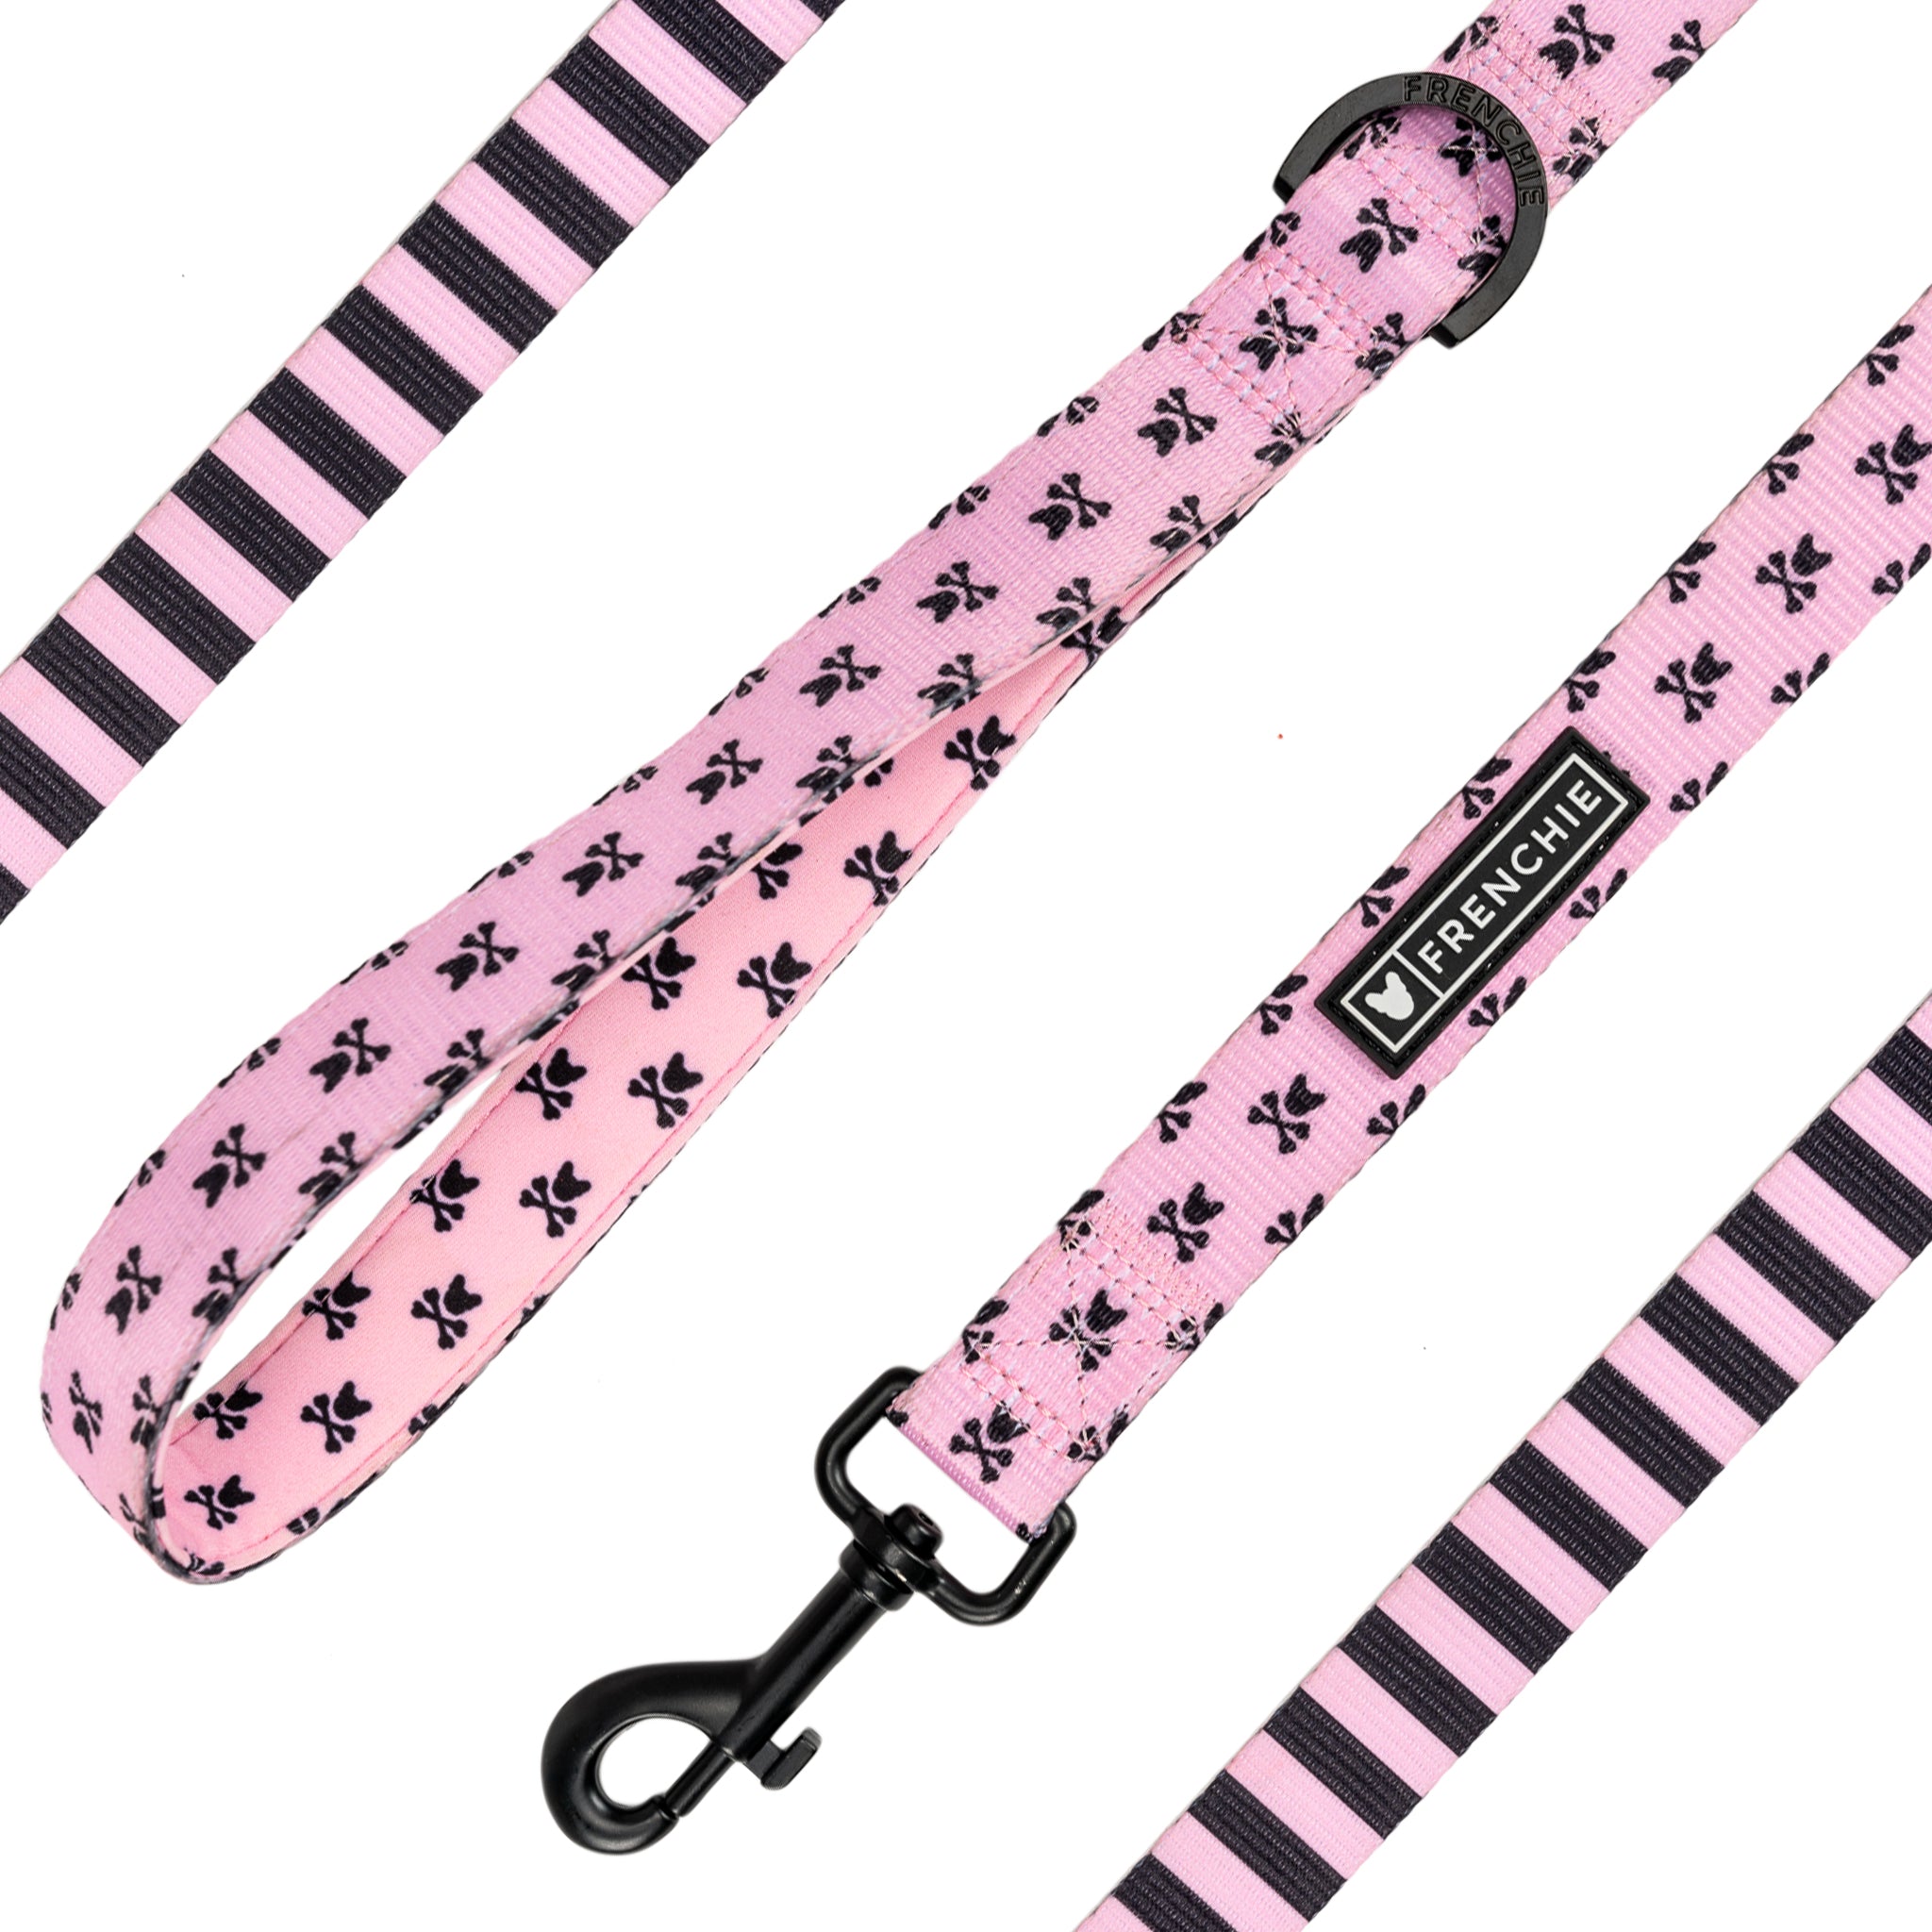 Frenchie Comfort Leash - Pink Bad to the Bone - Frenchie Bulldog - Shop Harnesses for French Bulldogs - Shop French Bulldog Harness - Harnesses for Pugs